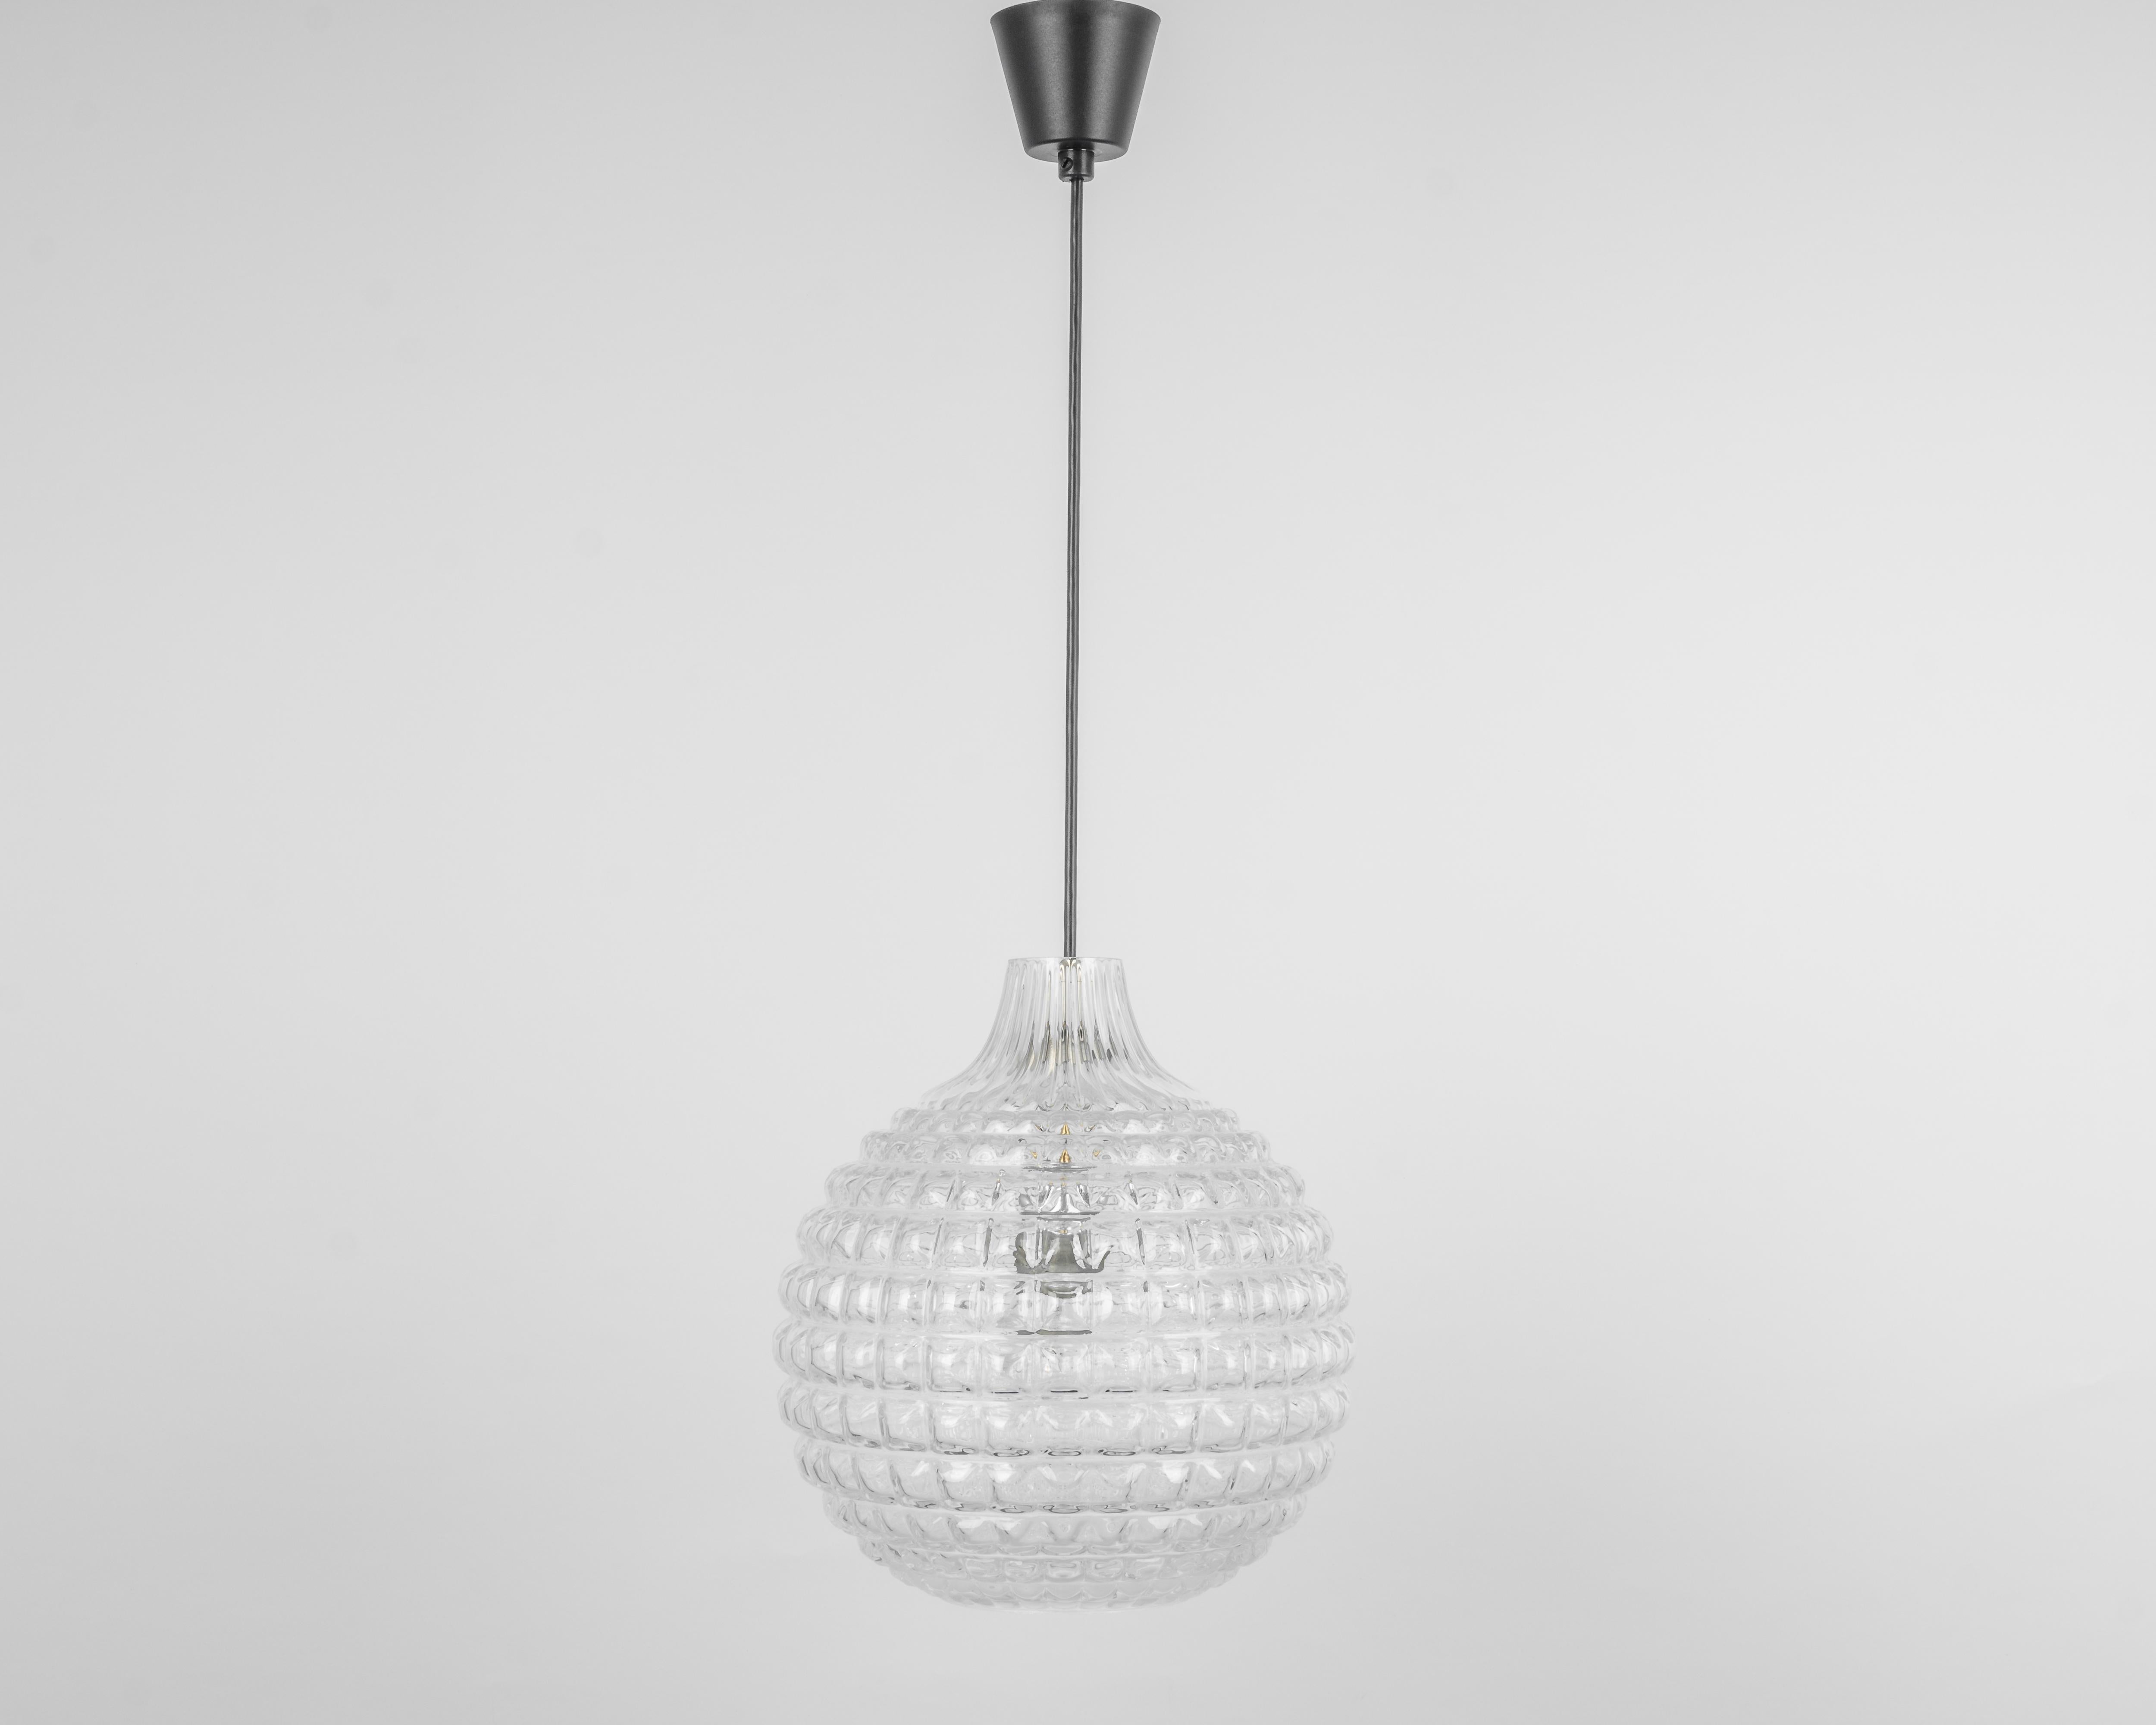 1 of 2 Stunning Crystal Glass Pendant Light, Peill & Putzler, Germany, 1970s For Sale 4